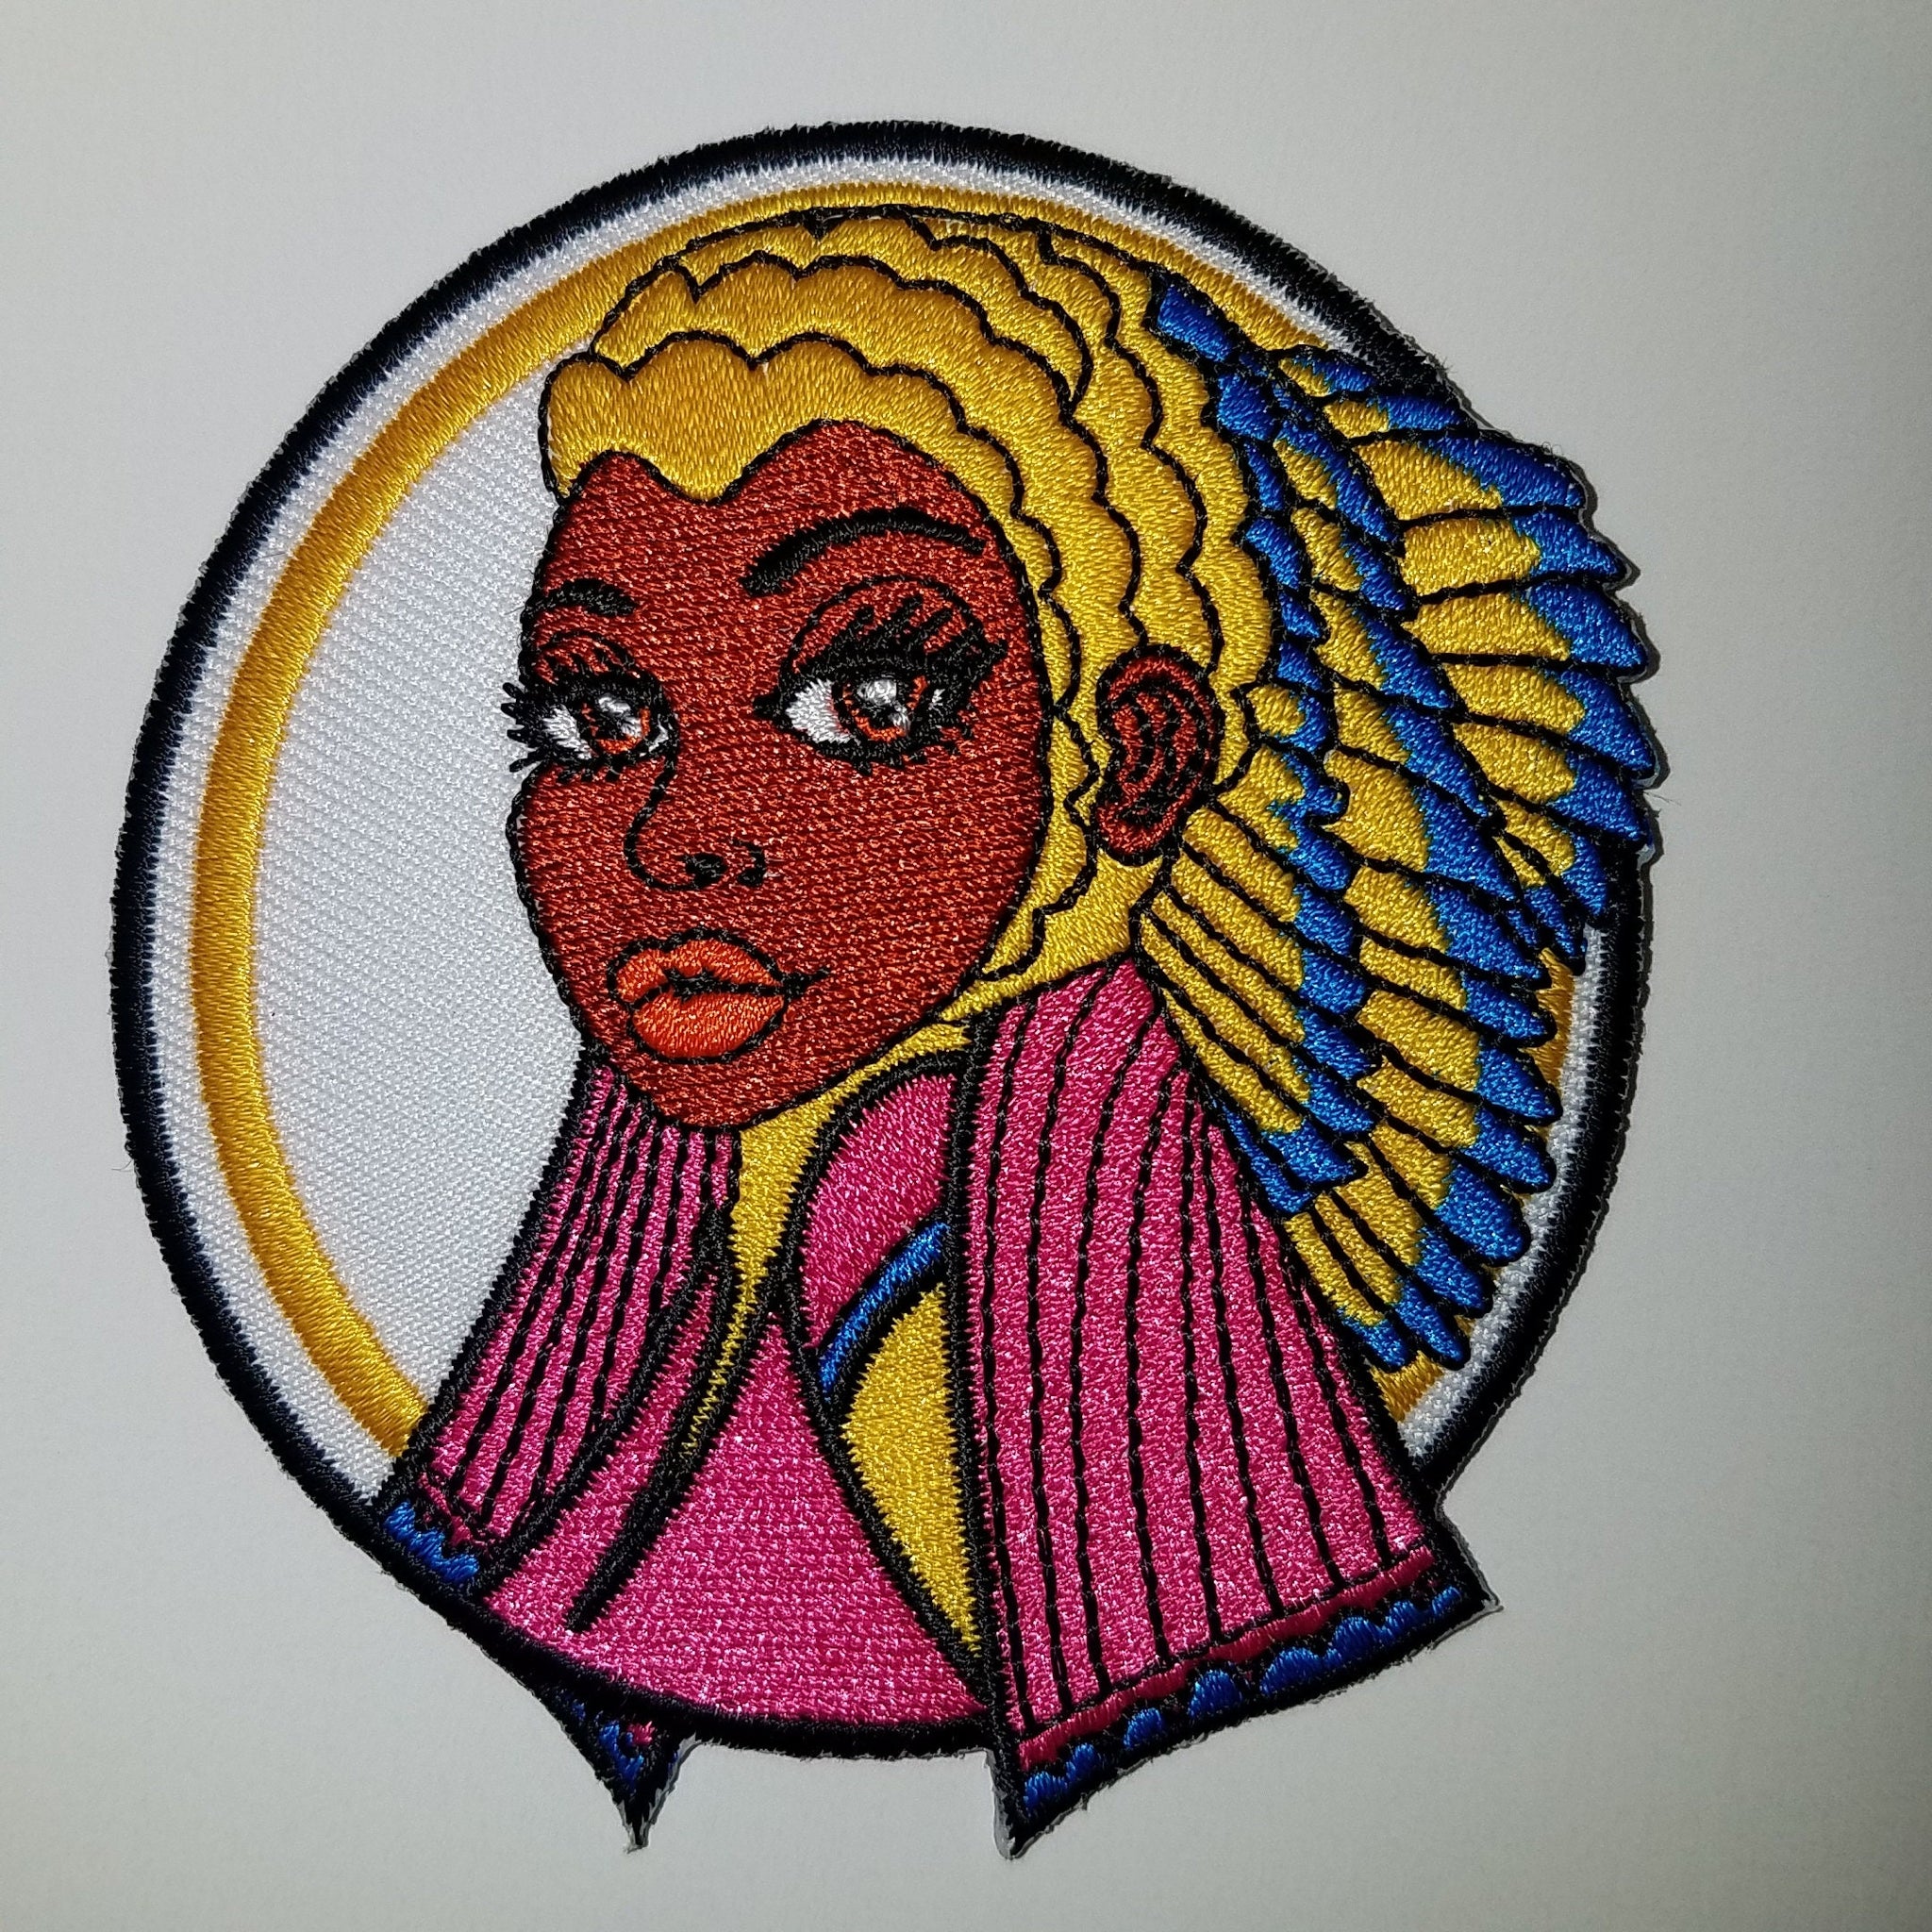 Beautiful Cherokee Queen, 4-inch Melanin Patch, Colorful Nubian Iron or Sew-on Embroidered 3D Afrocentric Patch,